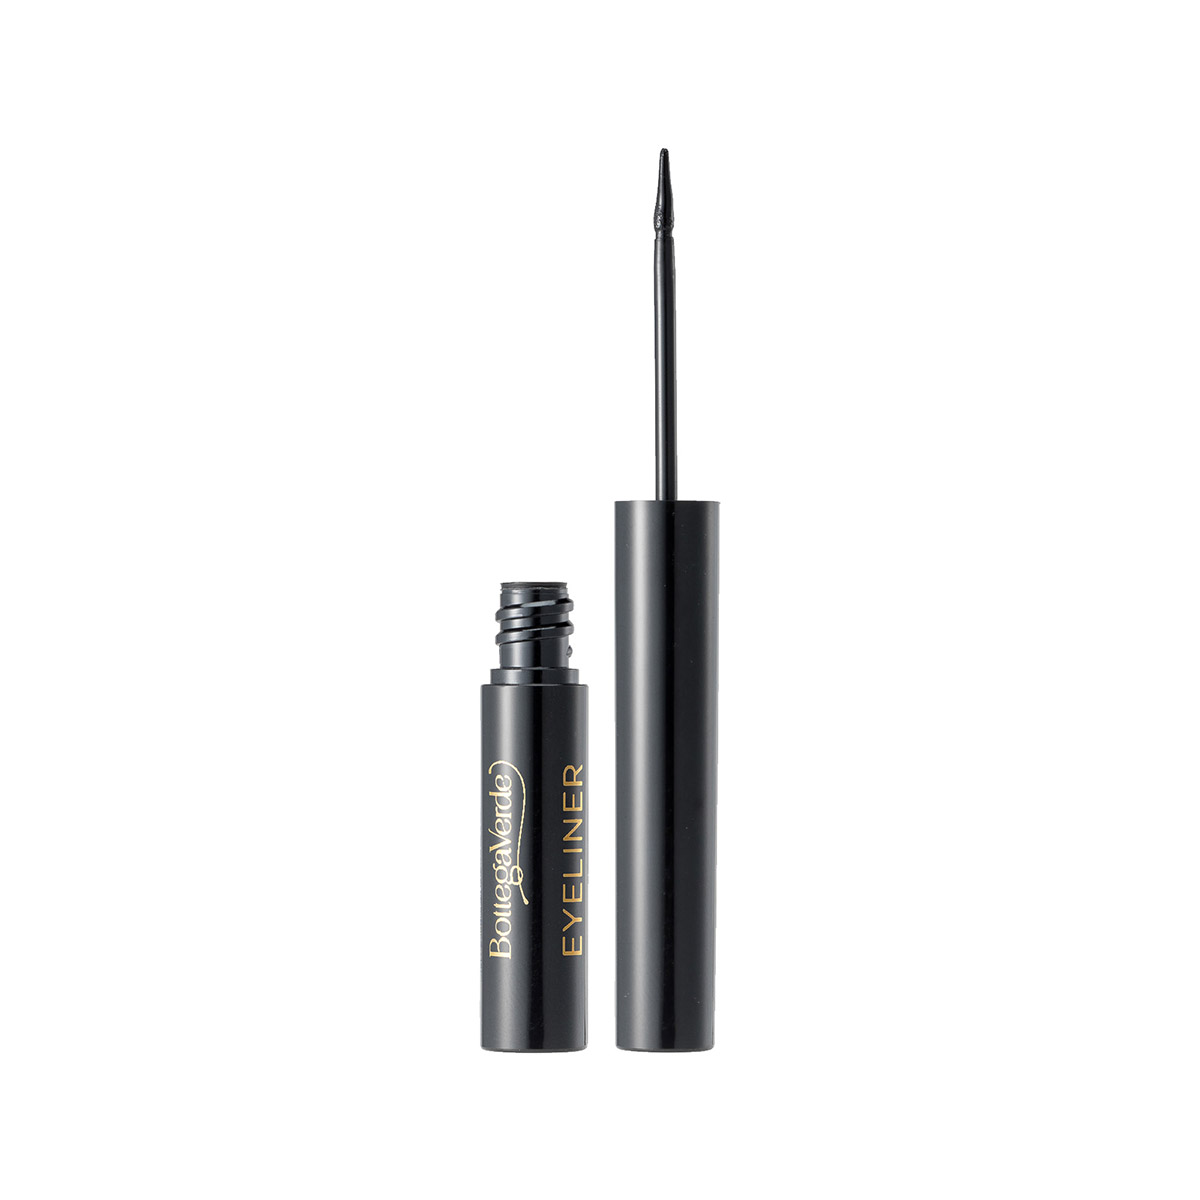 Glide-On Eyeliner with Cornflower Extract - pitch black